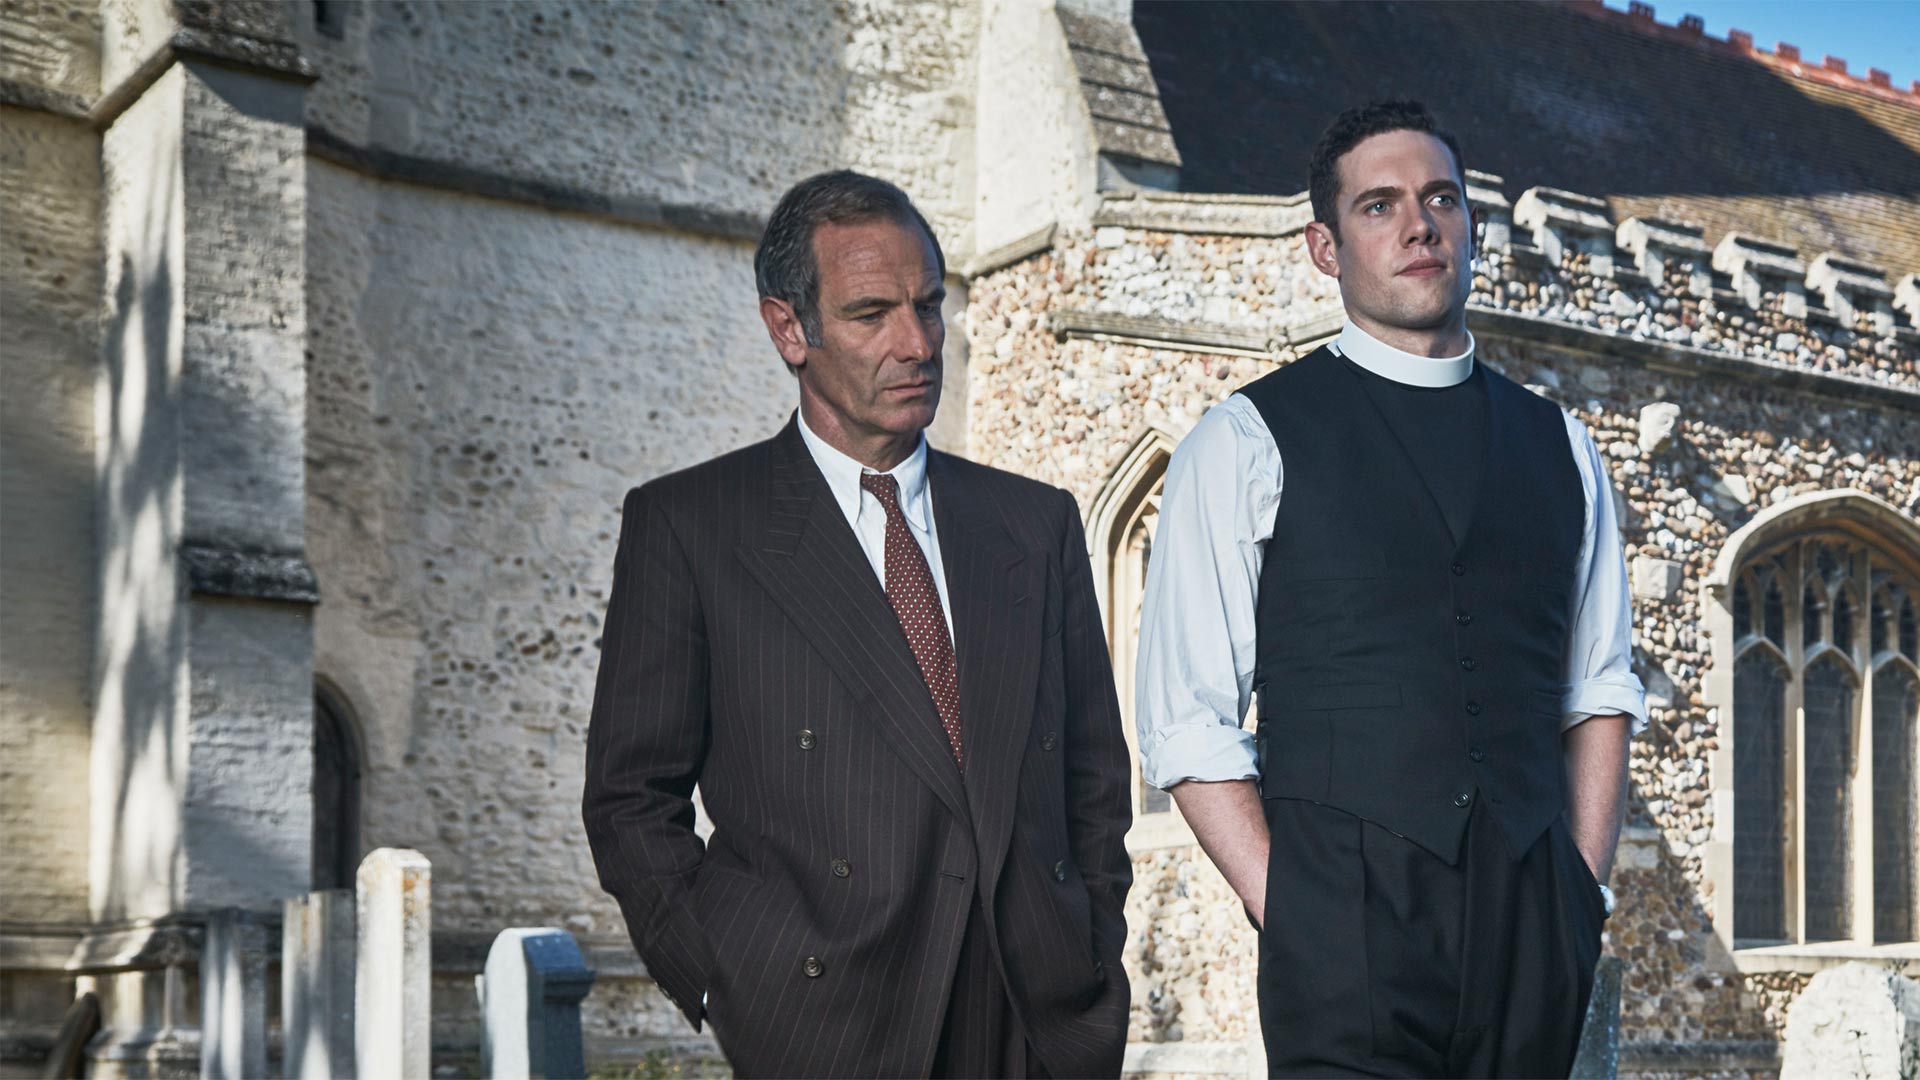 Pictured from left to right: Robson Green as Geordie Keating and Tom Brittney as Will Davenport